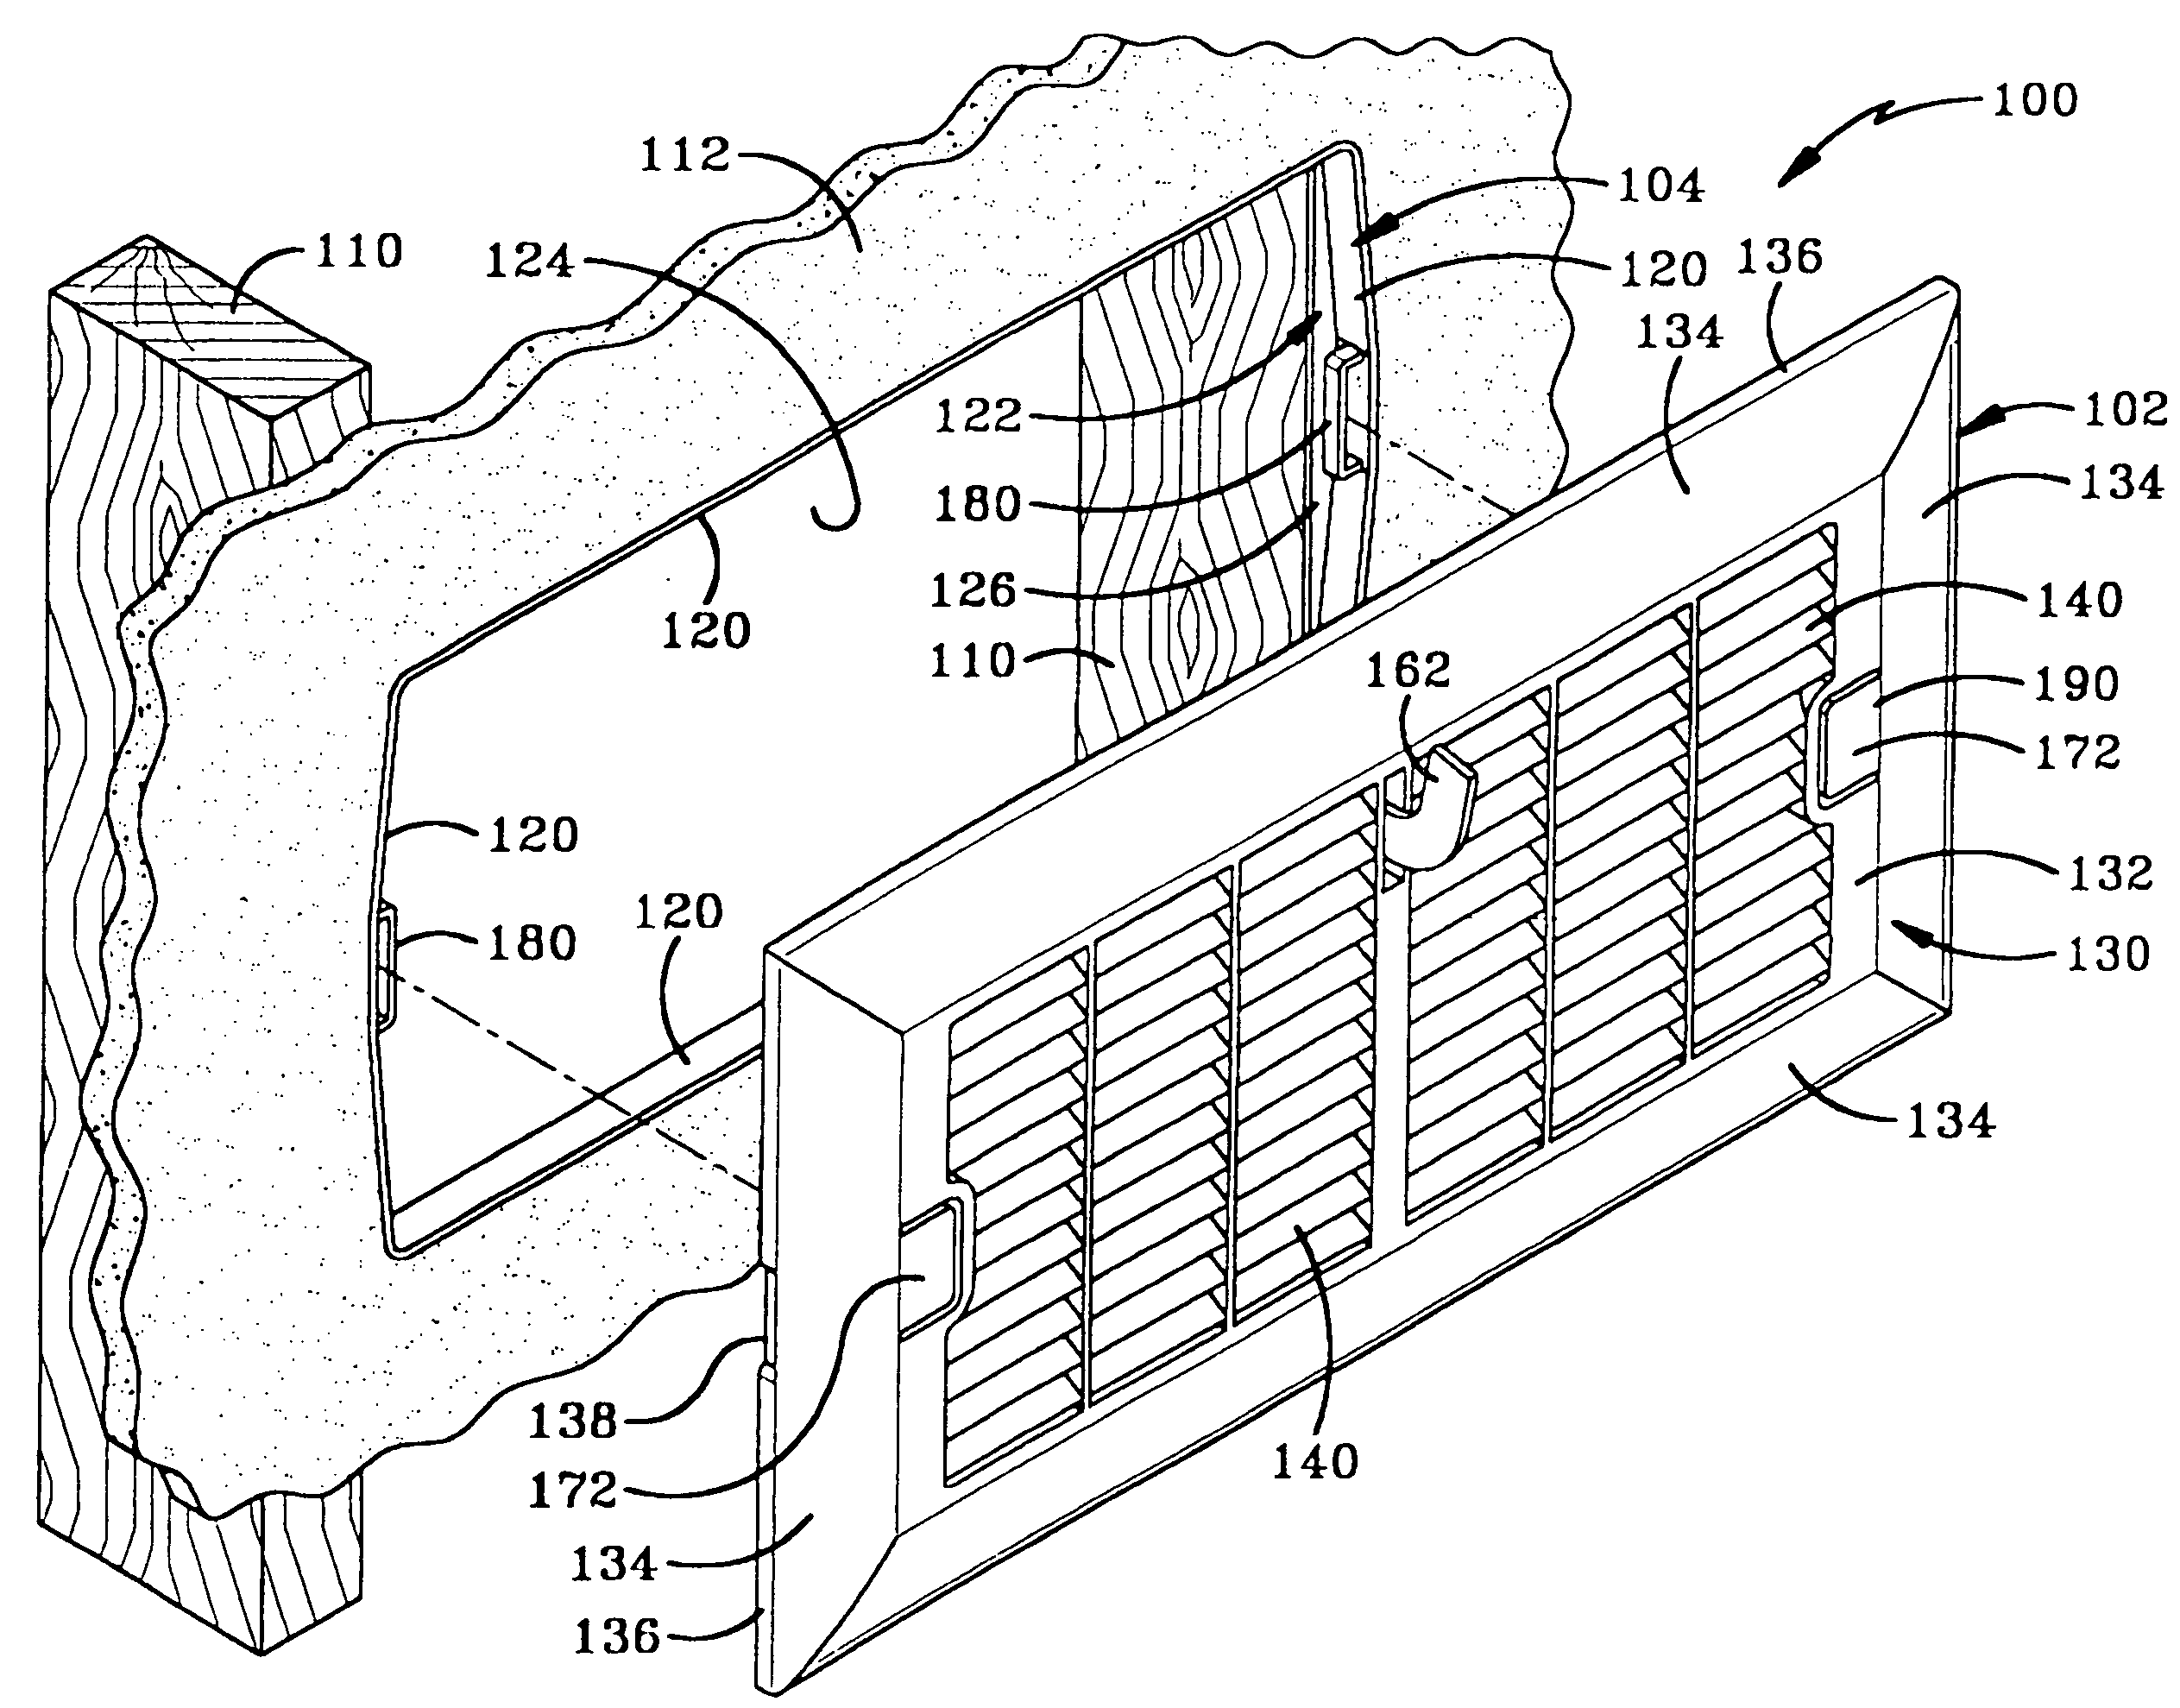 Register grille and connector frame with releasable connection